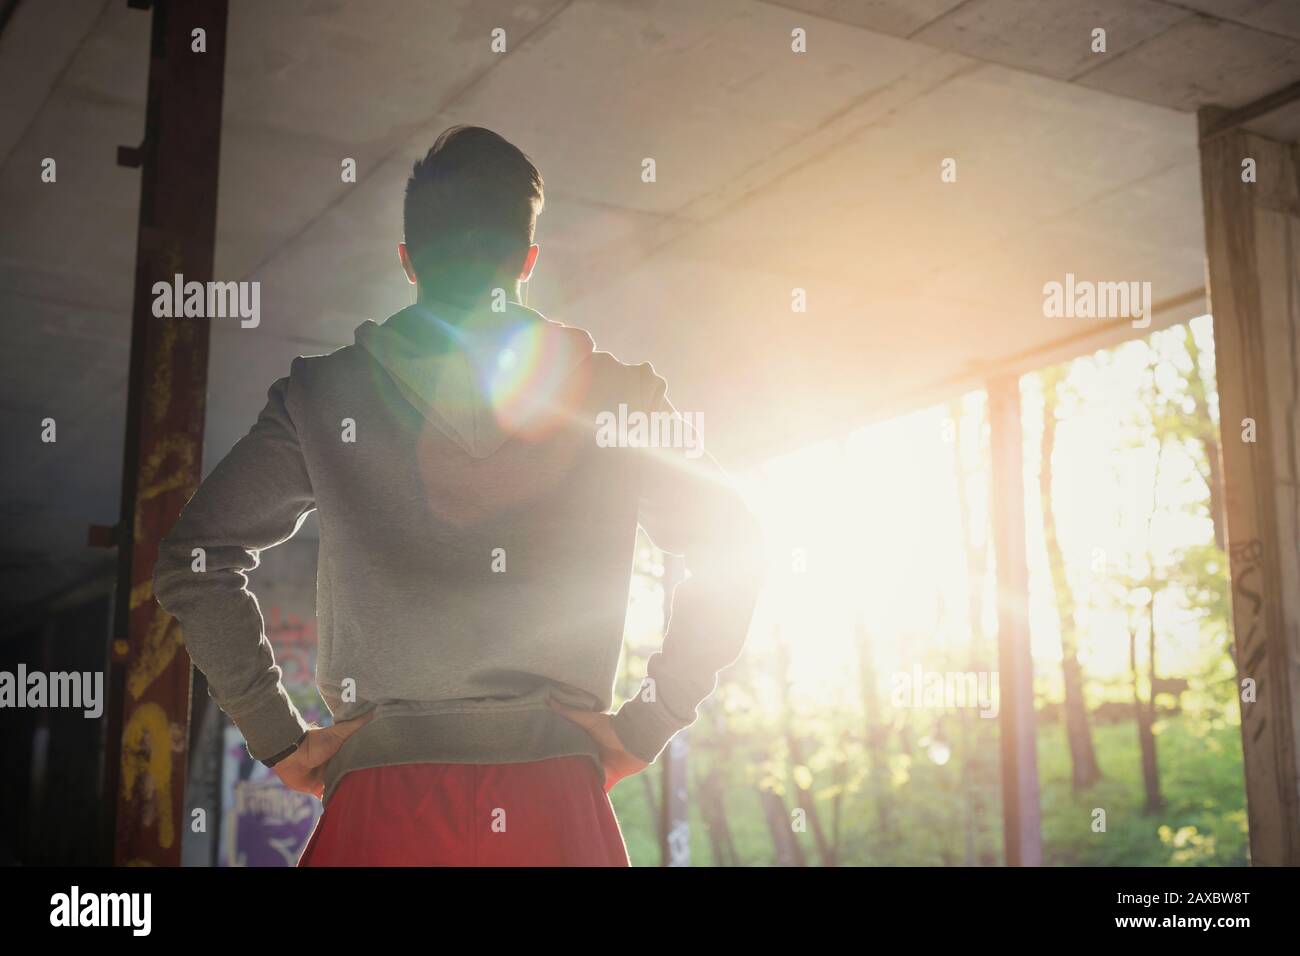 Young male runner resting, standing with hands on hips in sunny abandoned building Stock Photo